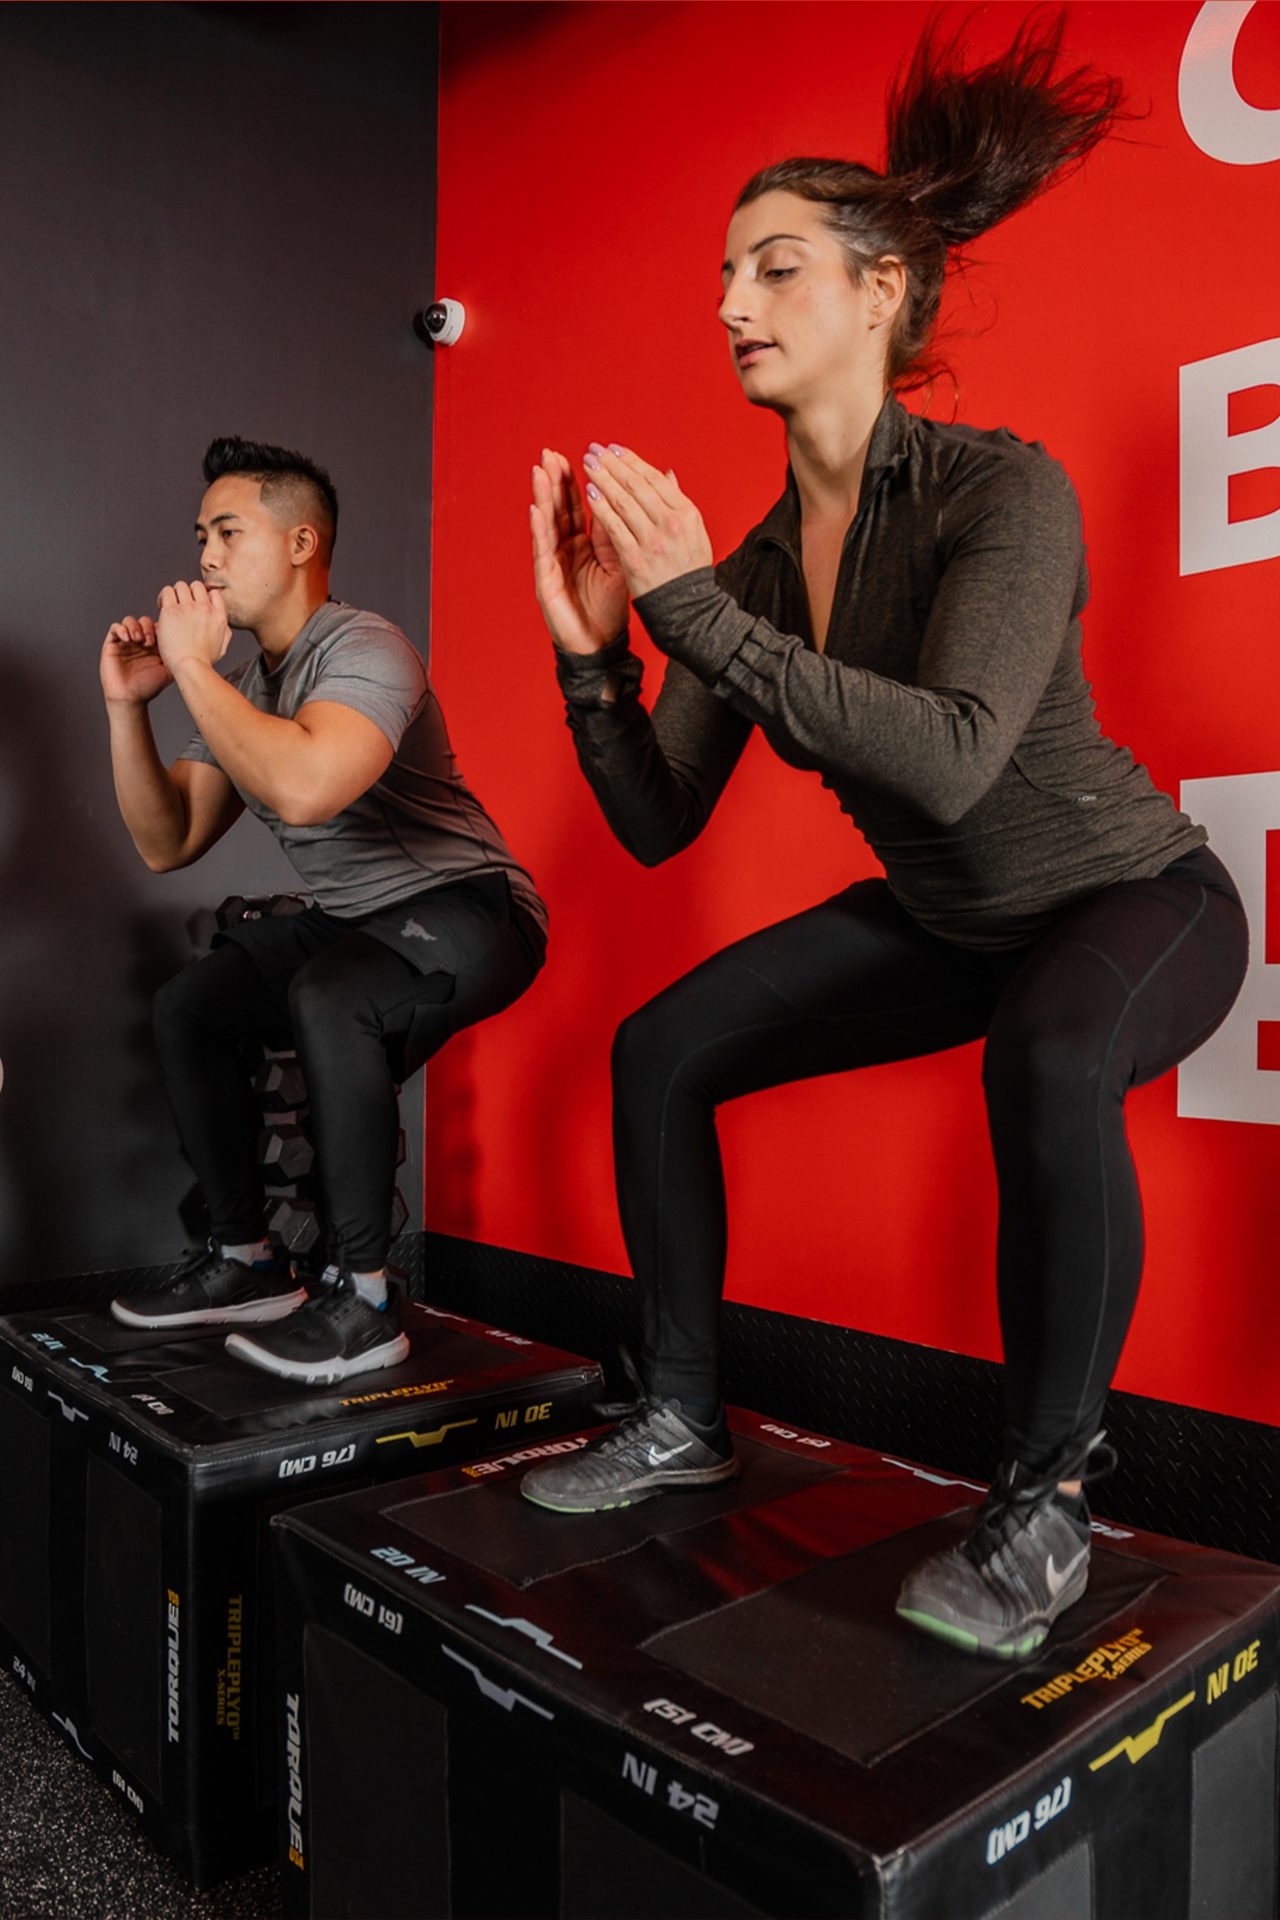 Woman and man doing box jumps onto black boxes